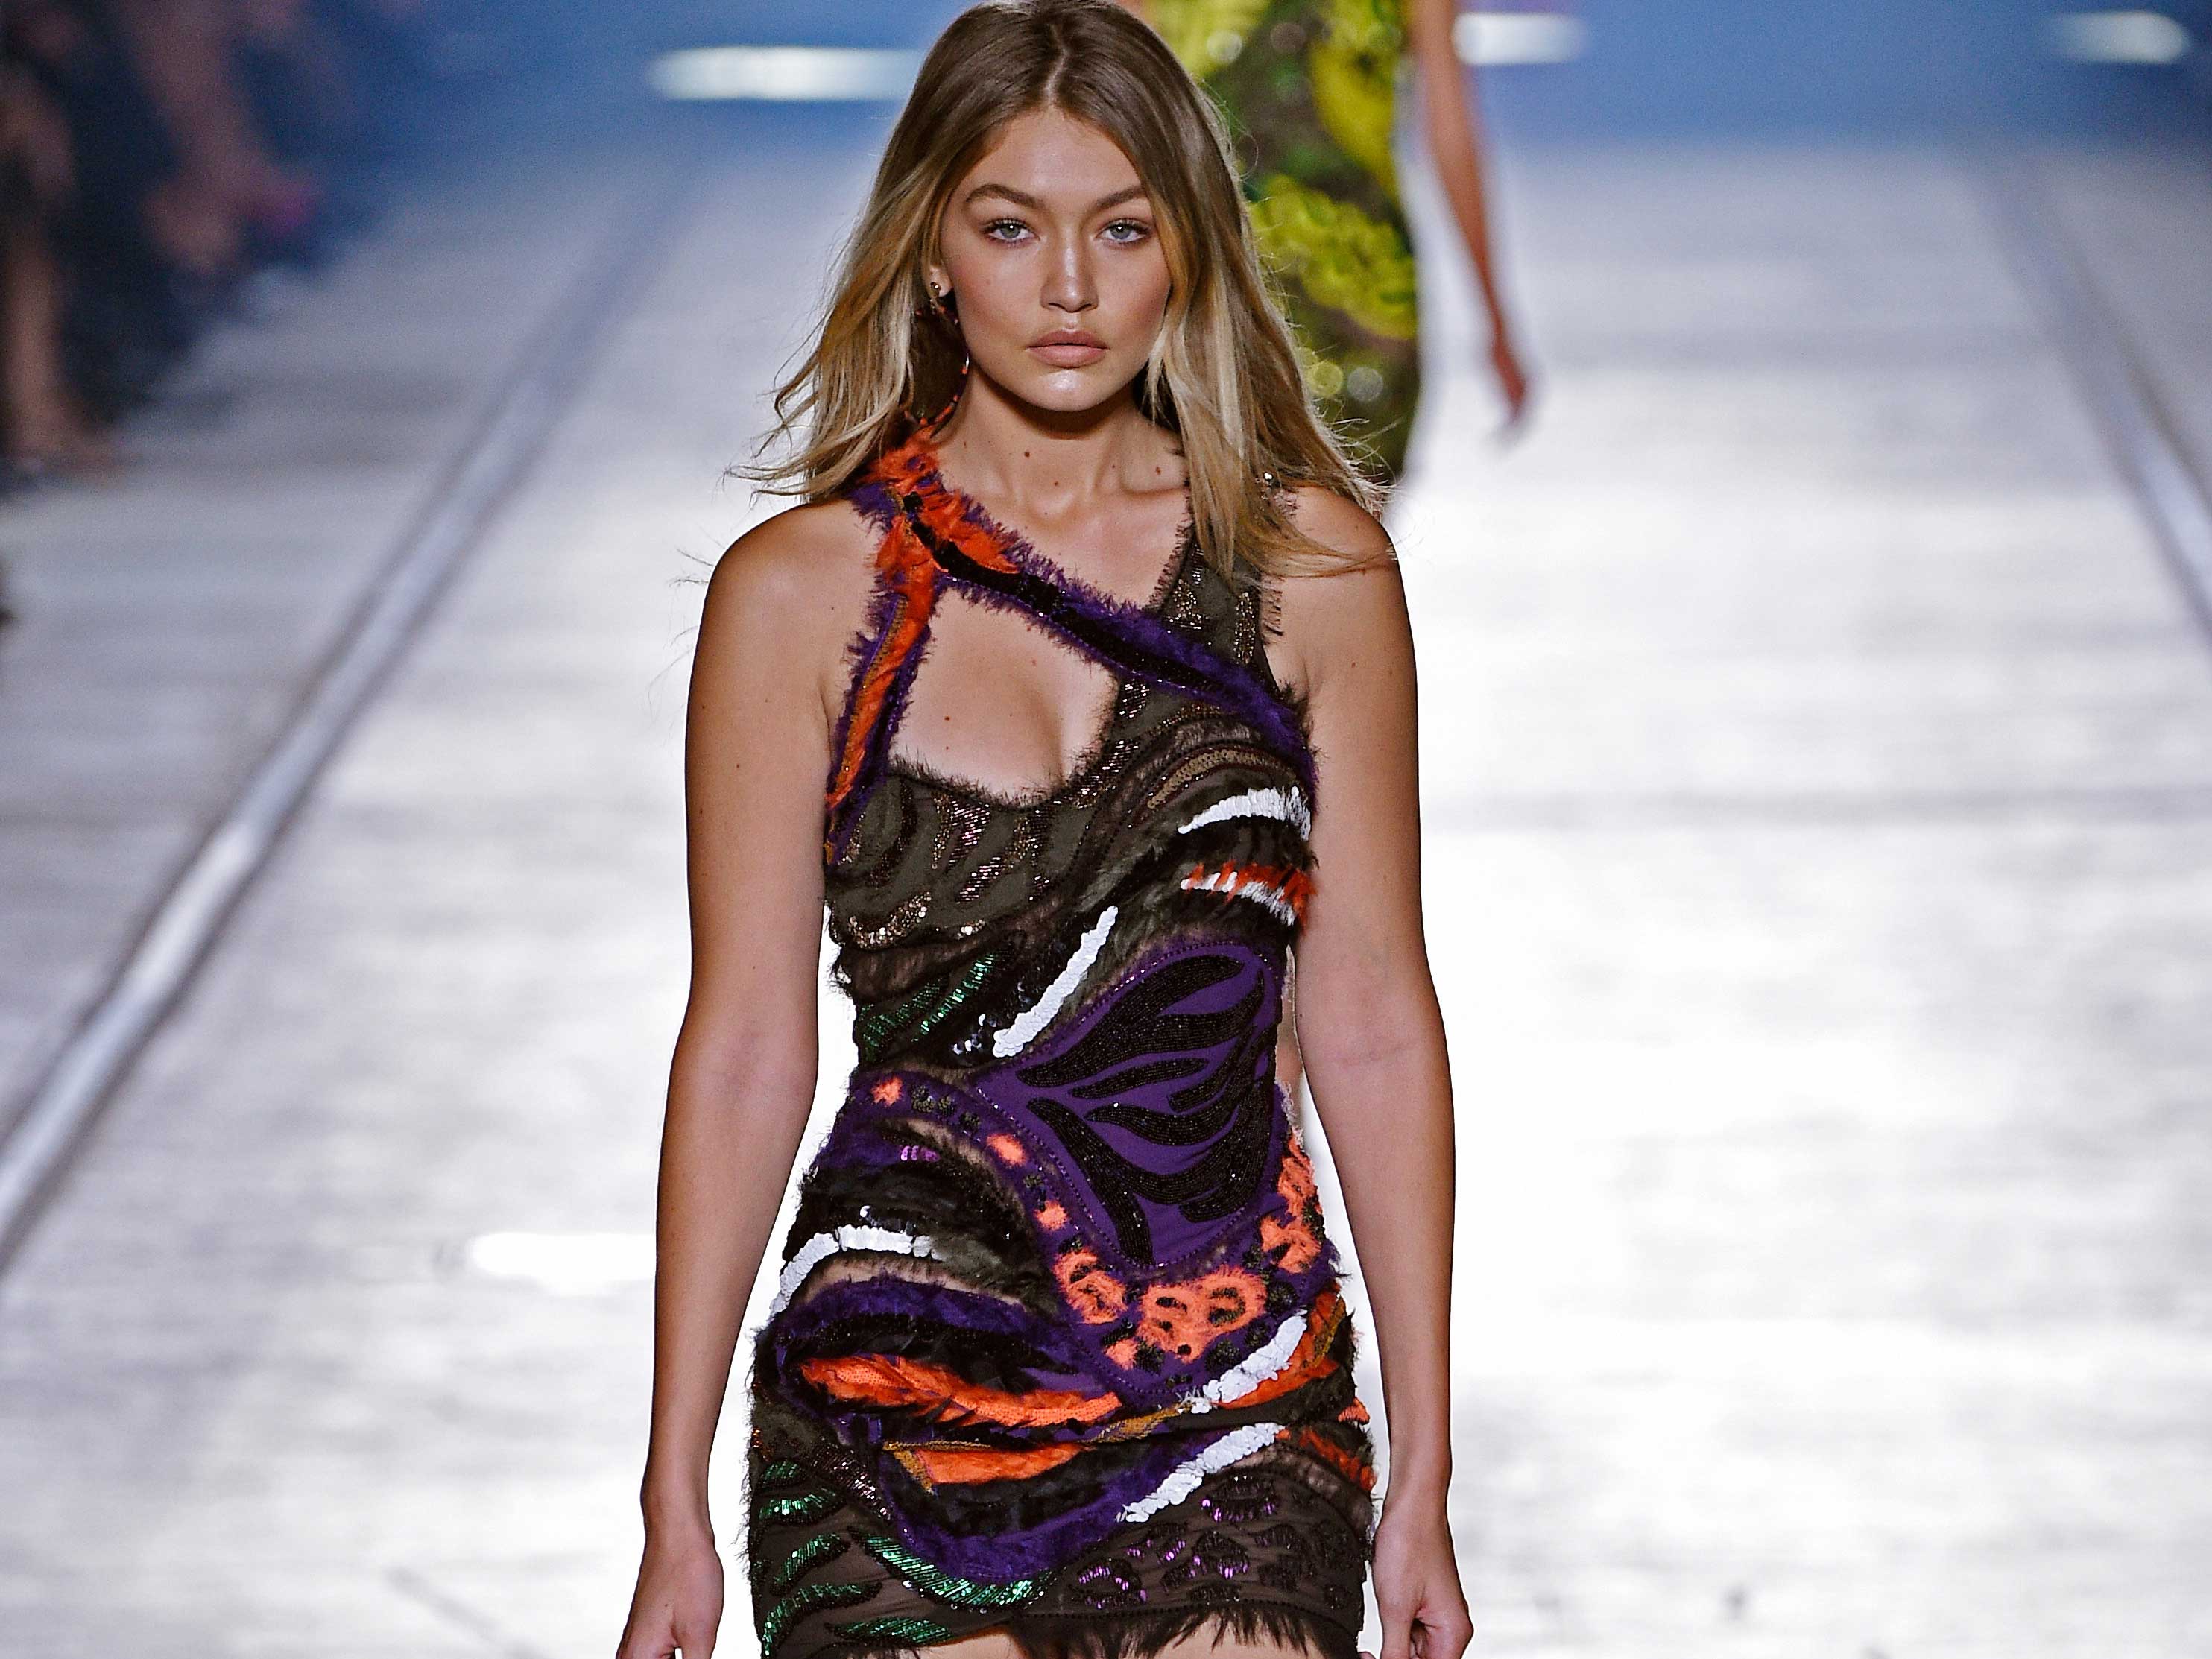 Gigi Hadid Told She Didn't Have a Runway Body When She Started